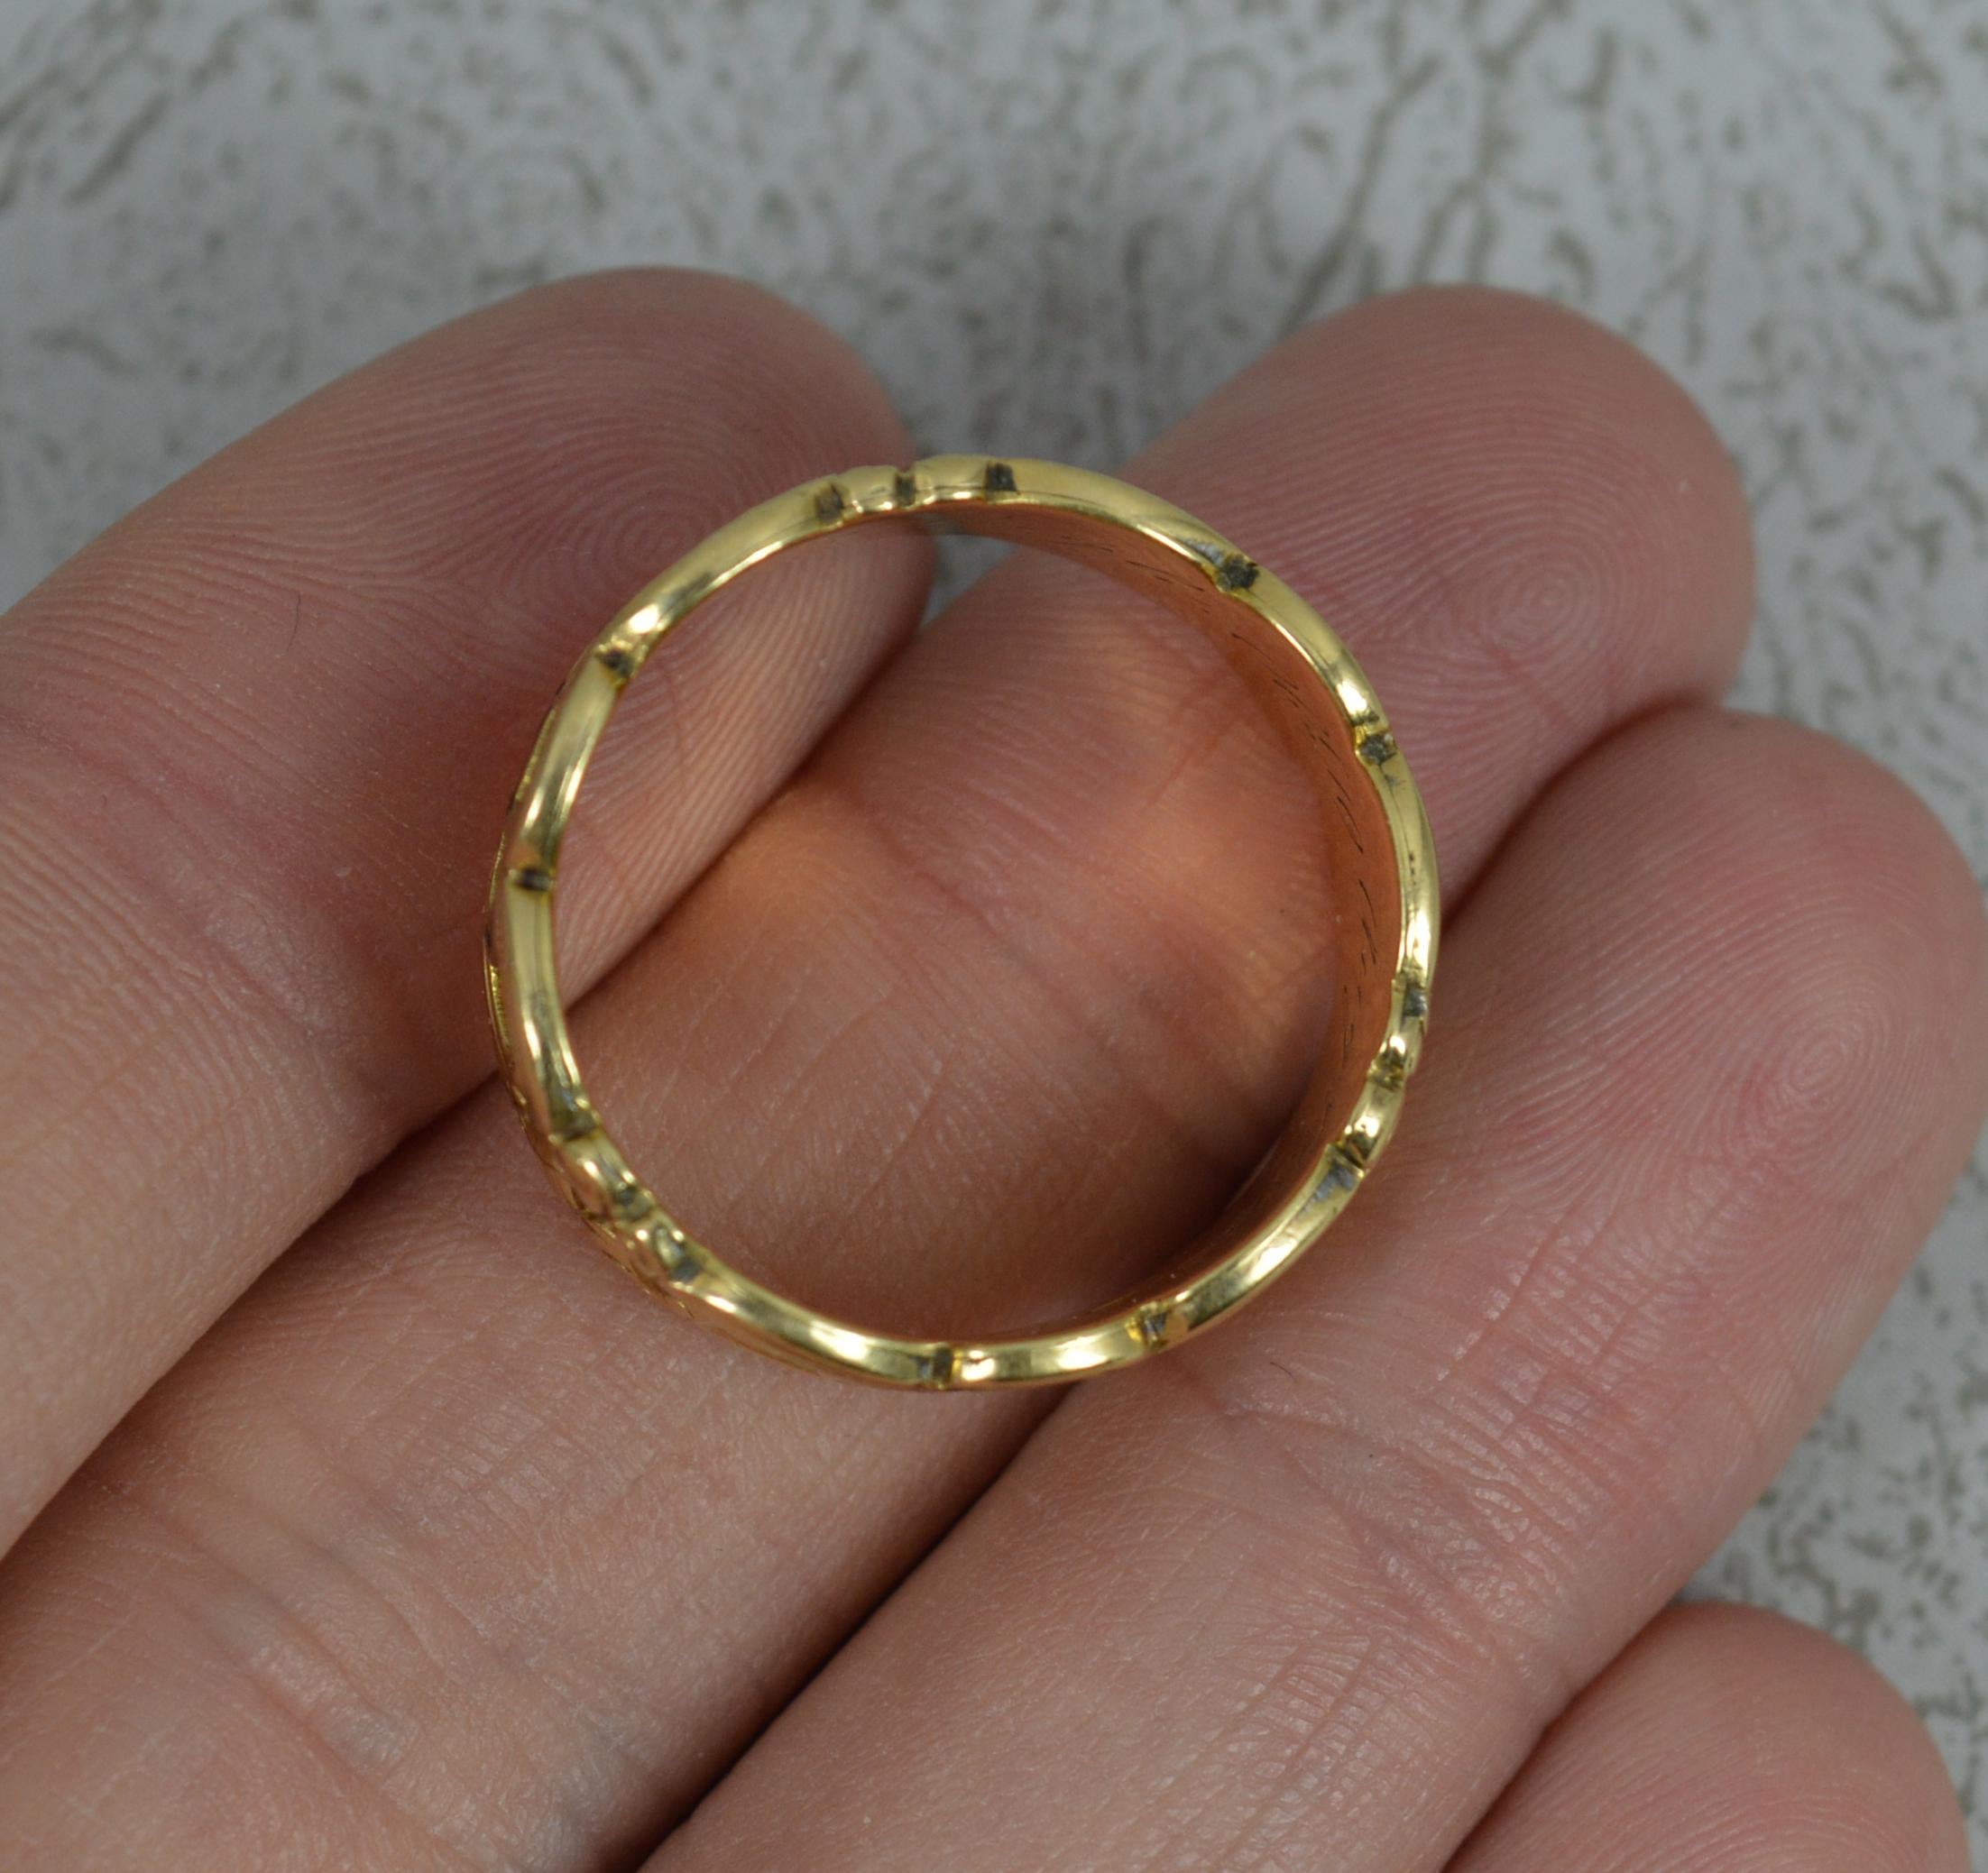 Early Victorian 1842 Victorian 18 Carat Gold Enamel In Memory of Mourning Band Ring For Sale